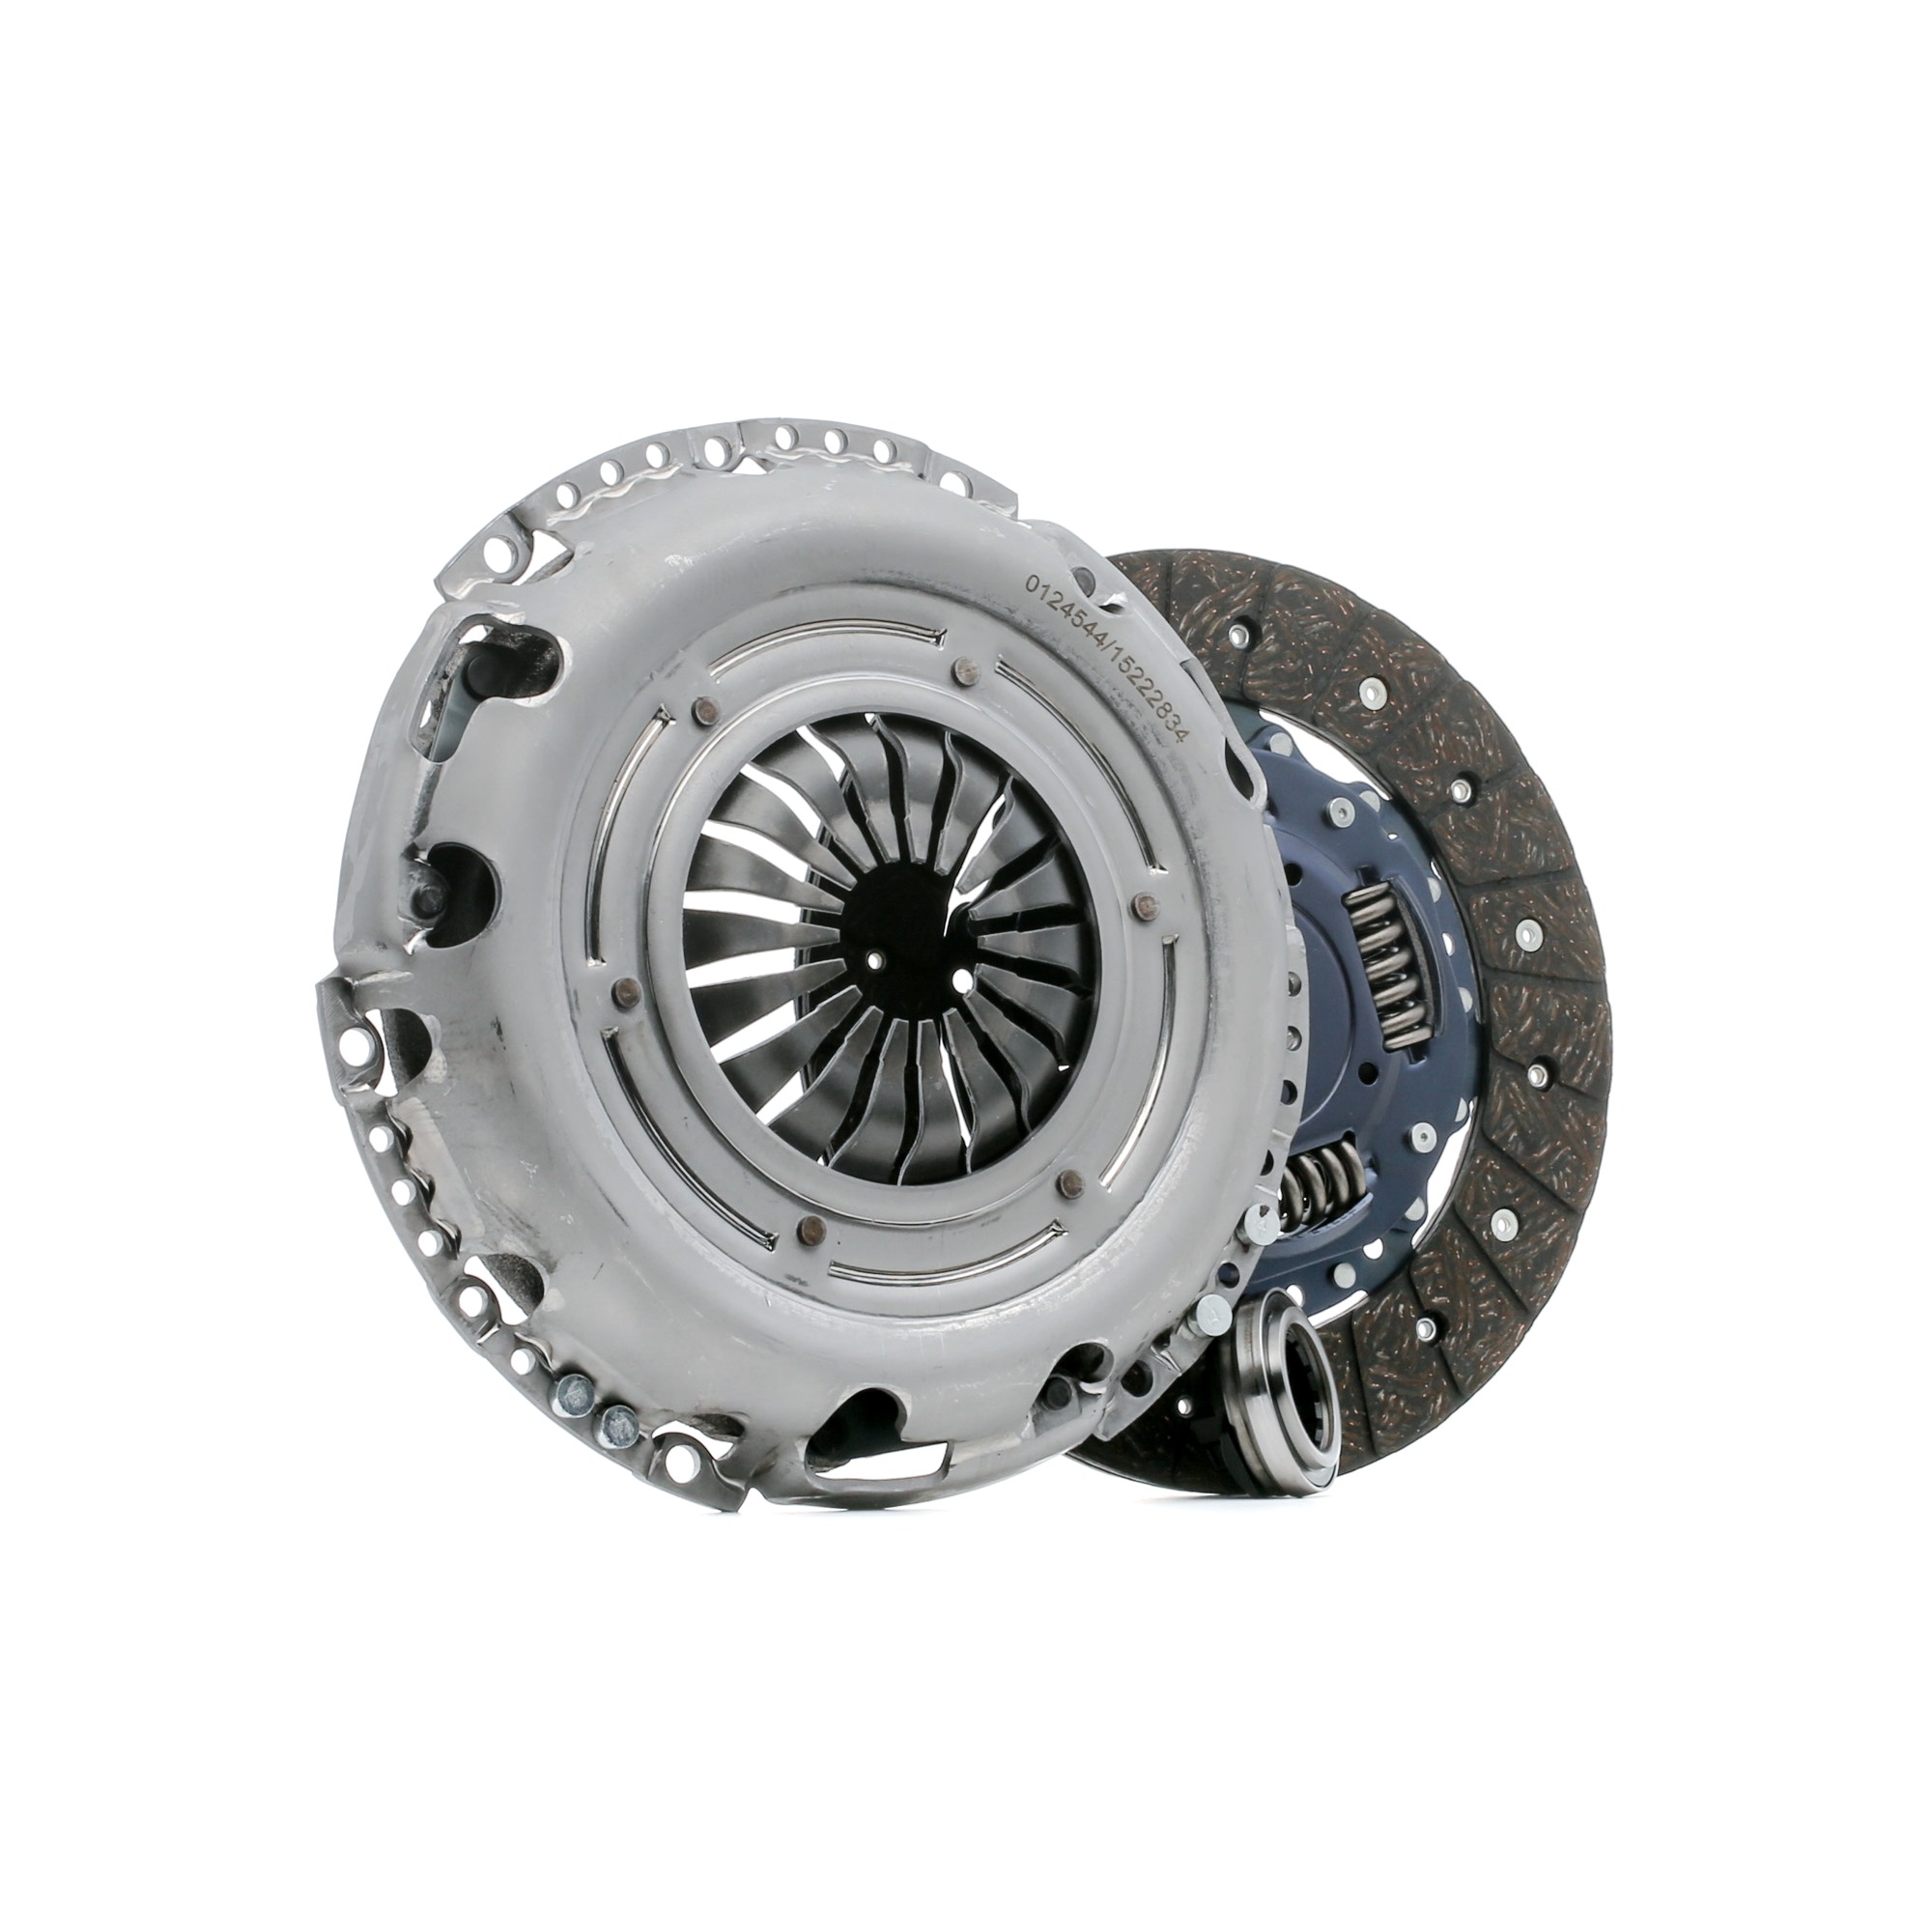 STARK SKCK-0100387 Clutch kit three-piece, with clutch pressure plate, with clutch disc, with clutch release bearing, without flywheel, 220mm